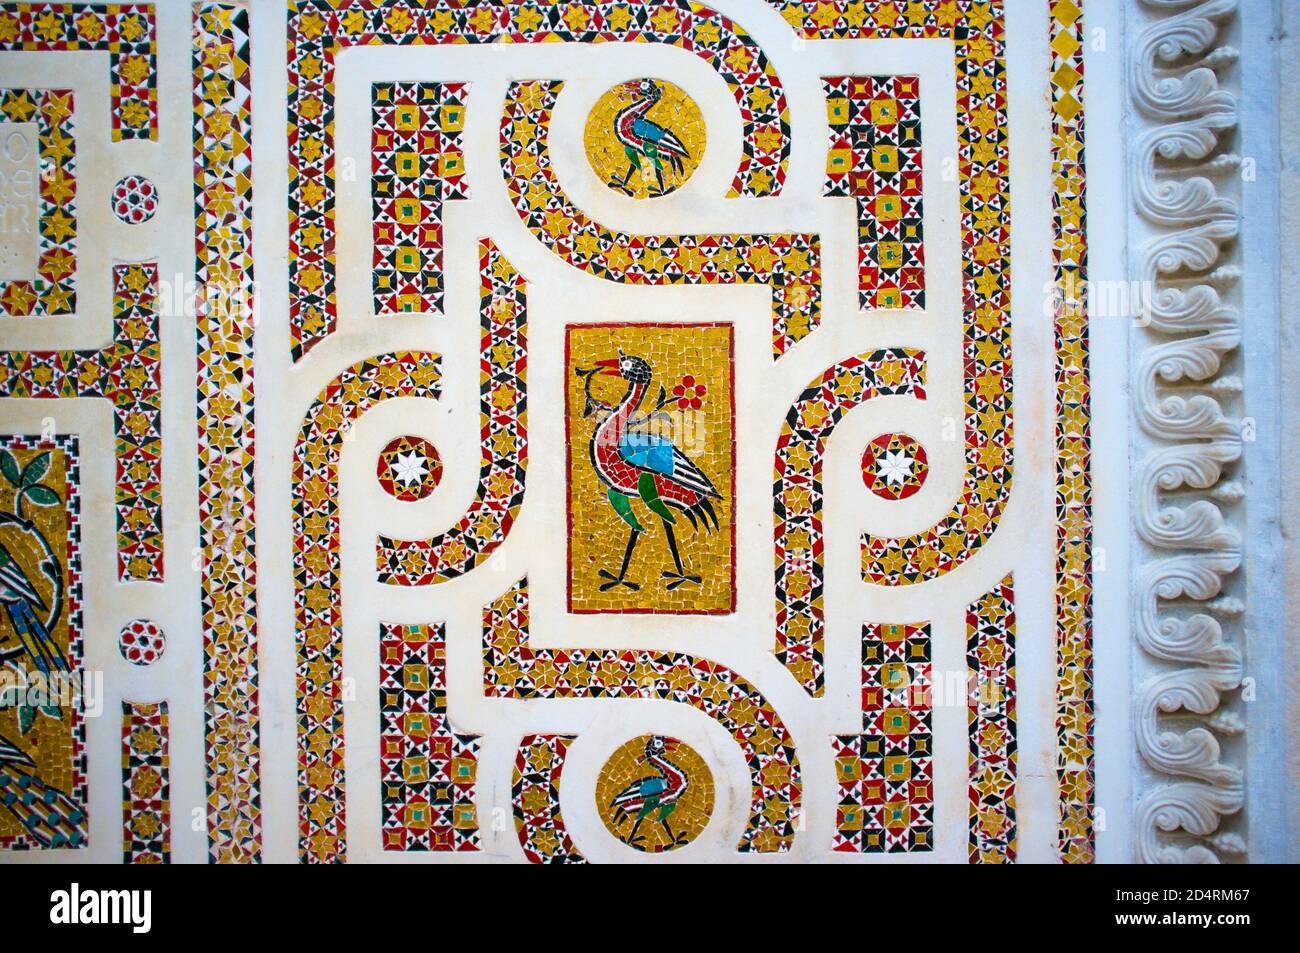 Brightly colored mosaic featuring a bird of paradise, on the Ambo of the Epistles (early reading stand) in the Duomo di Ravello, Amalfi Coast. Stock Photo